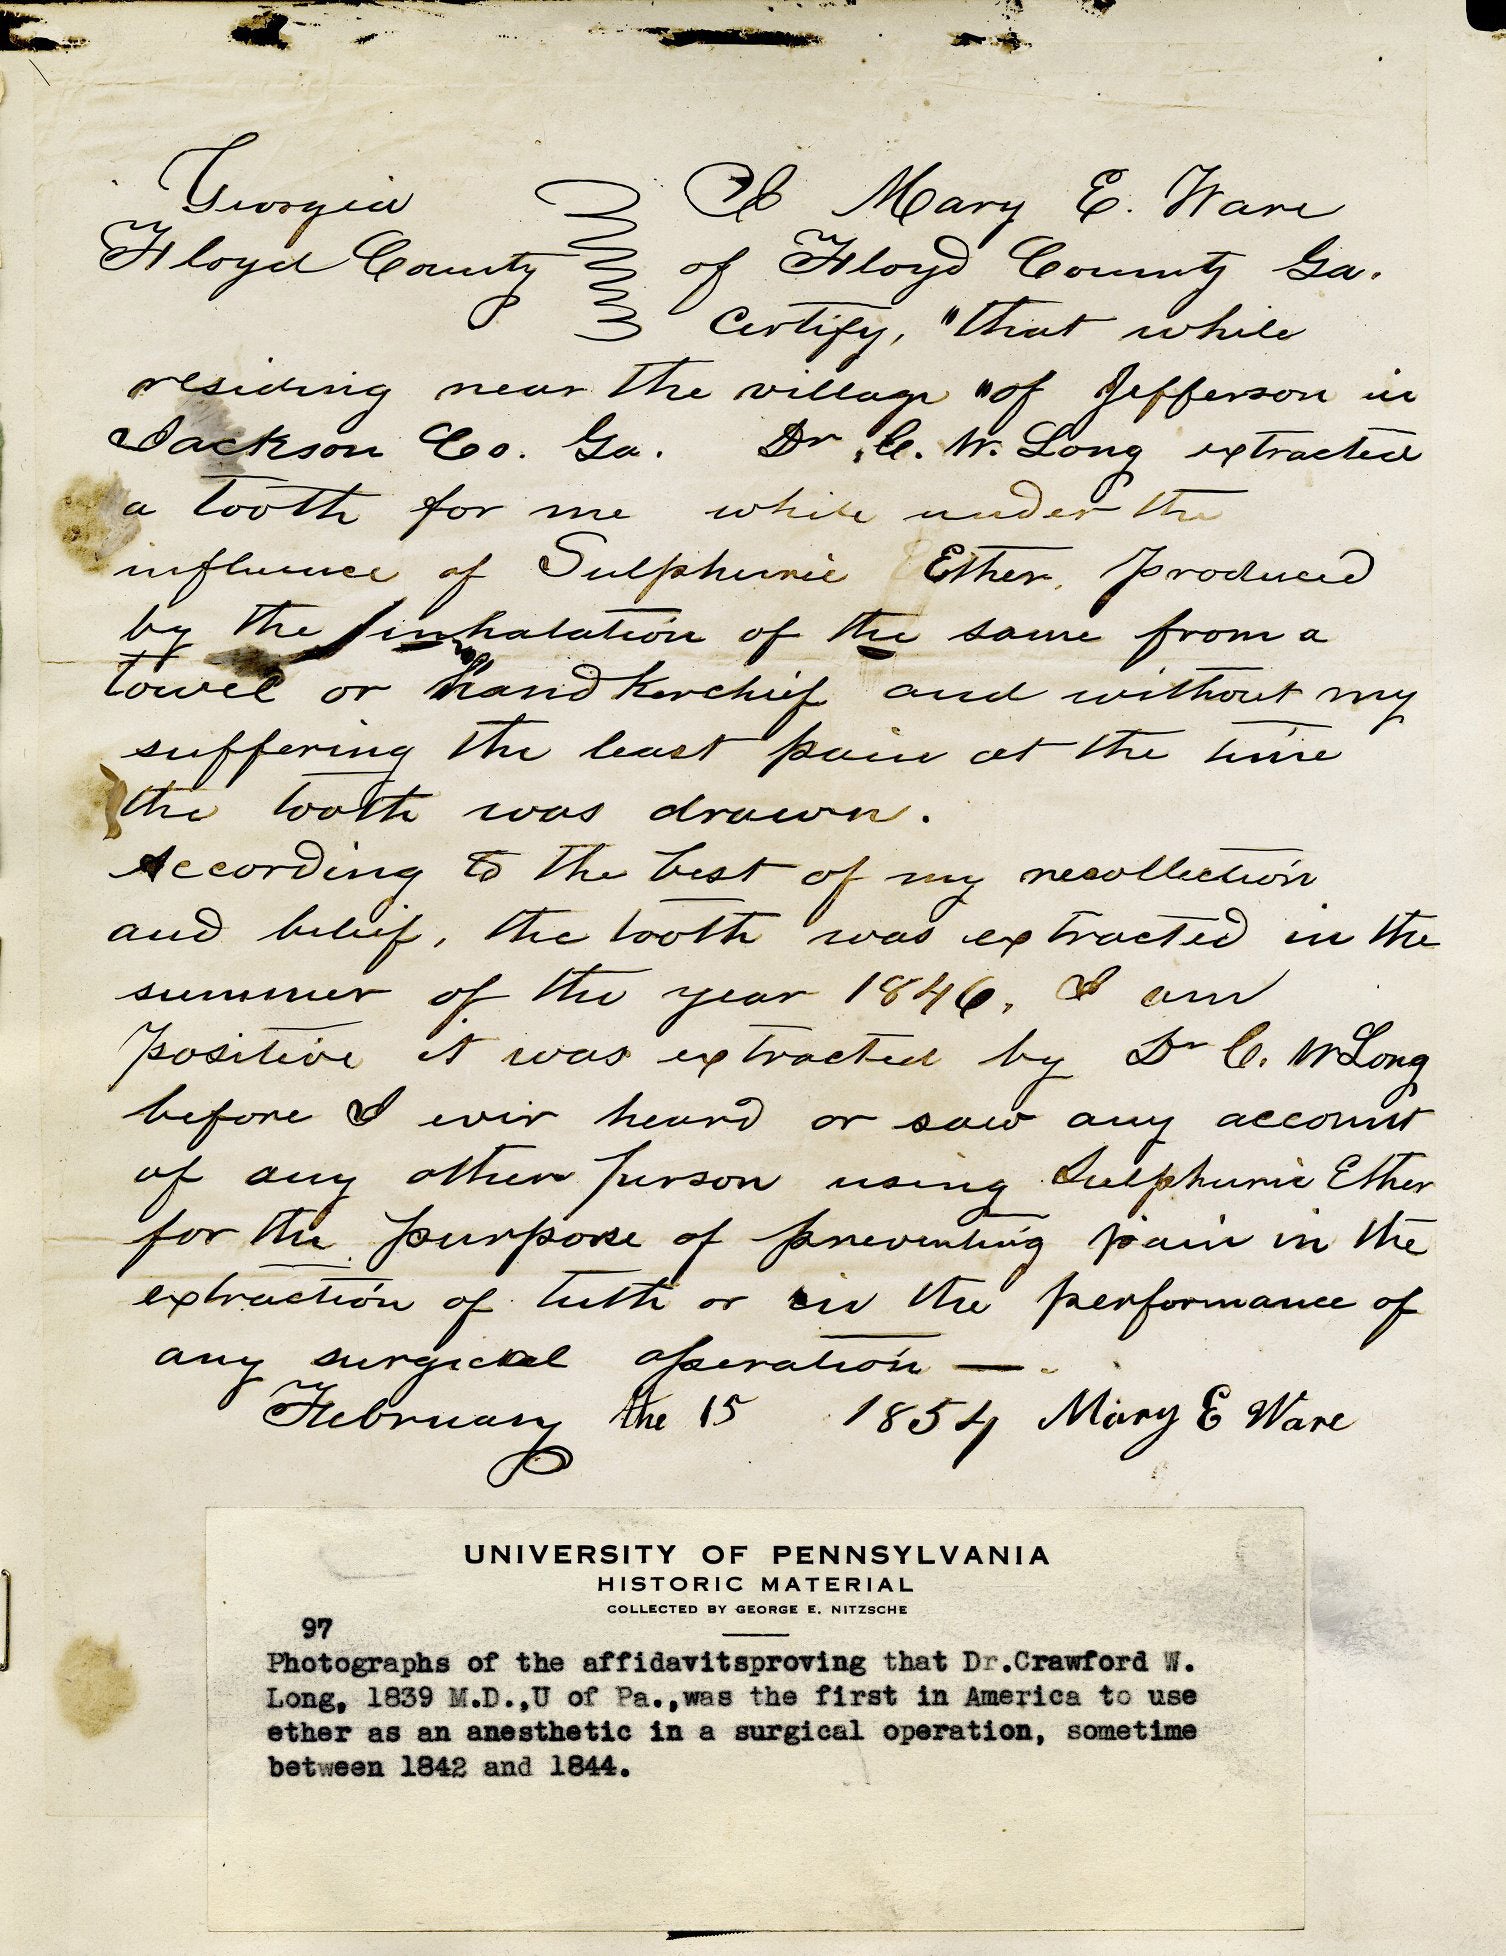 Crawford Williamson Long and his use of ether as an anesthetic in a surgical operation, photograph of original affidavit, 1854